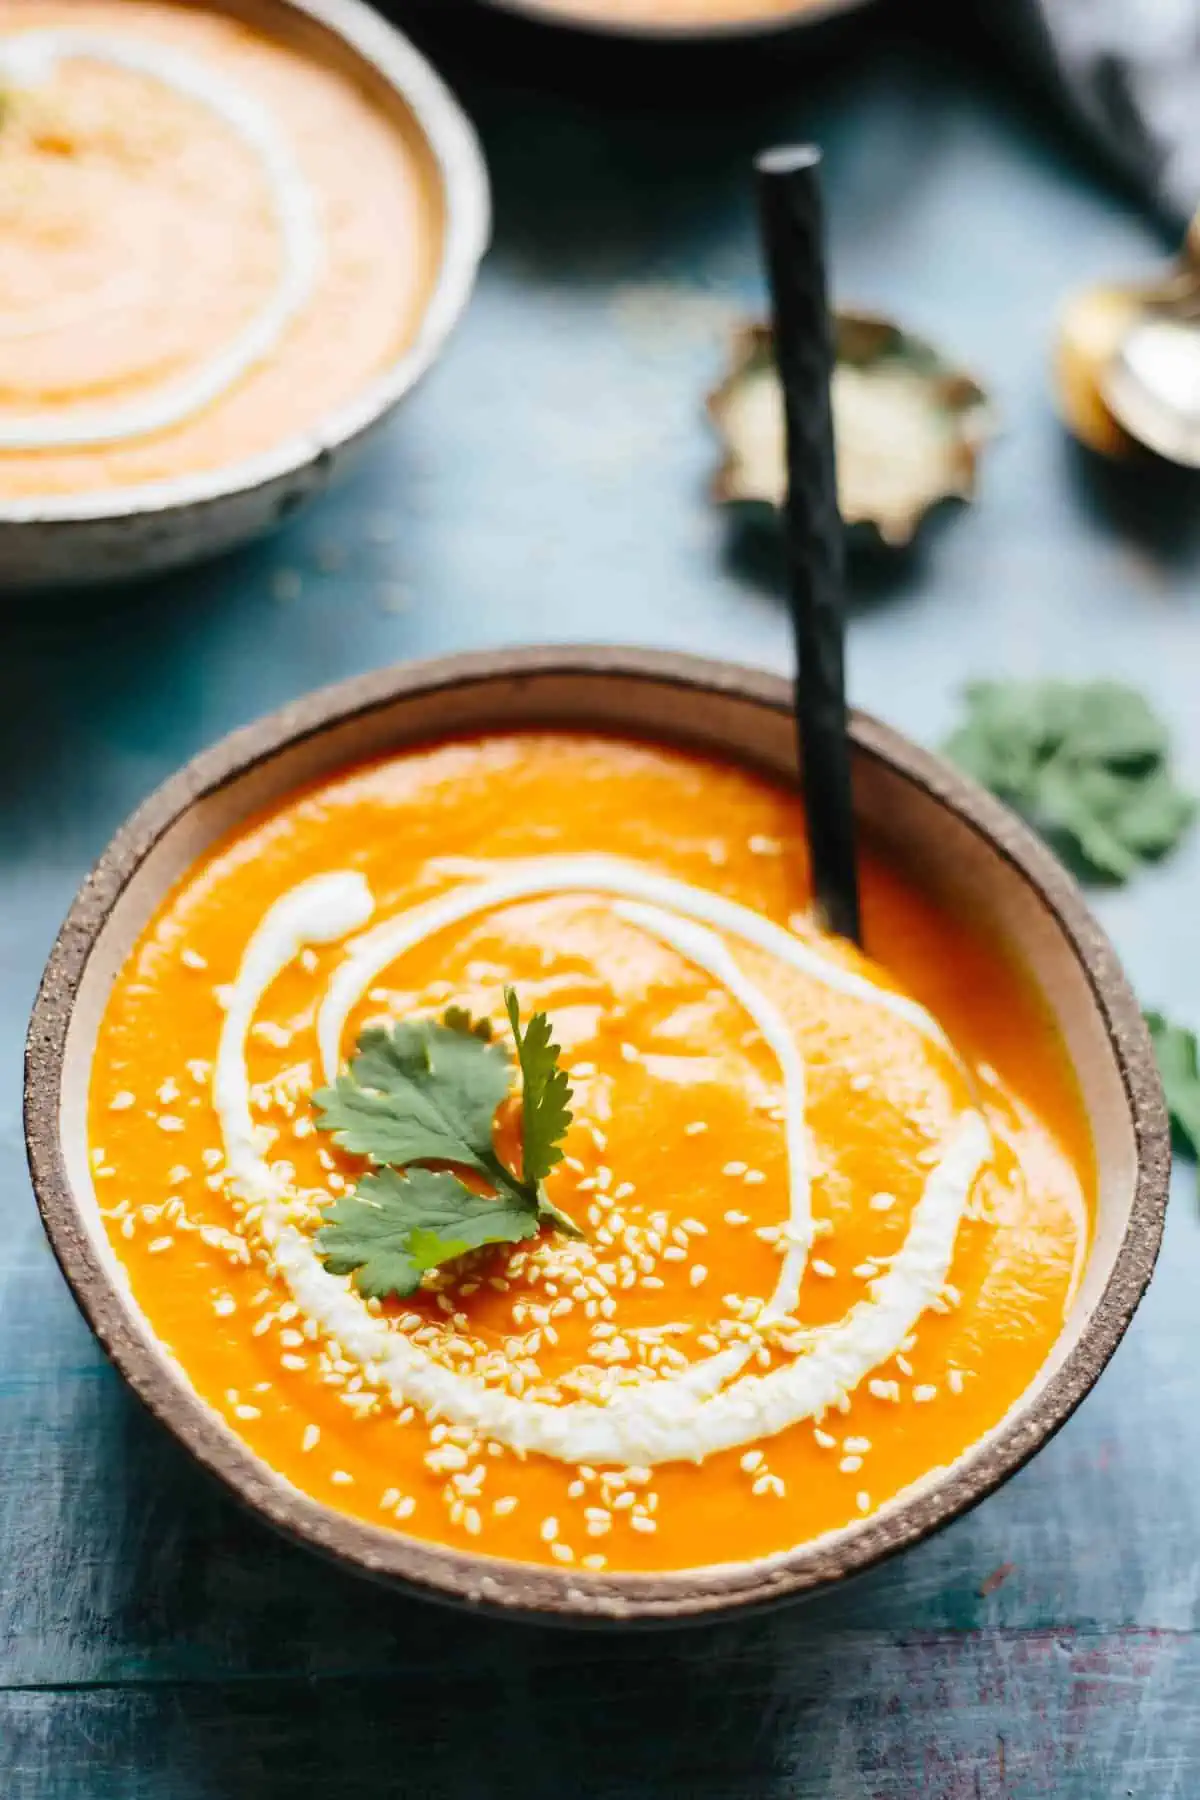 Vertical shot of a bowl of spicy pureed carrot soup garnished with cilantro, sesame seeds, and a yogurt swirl.